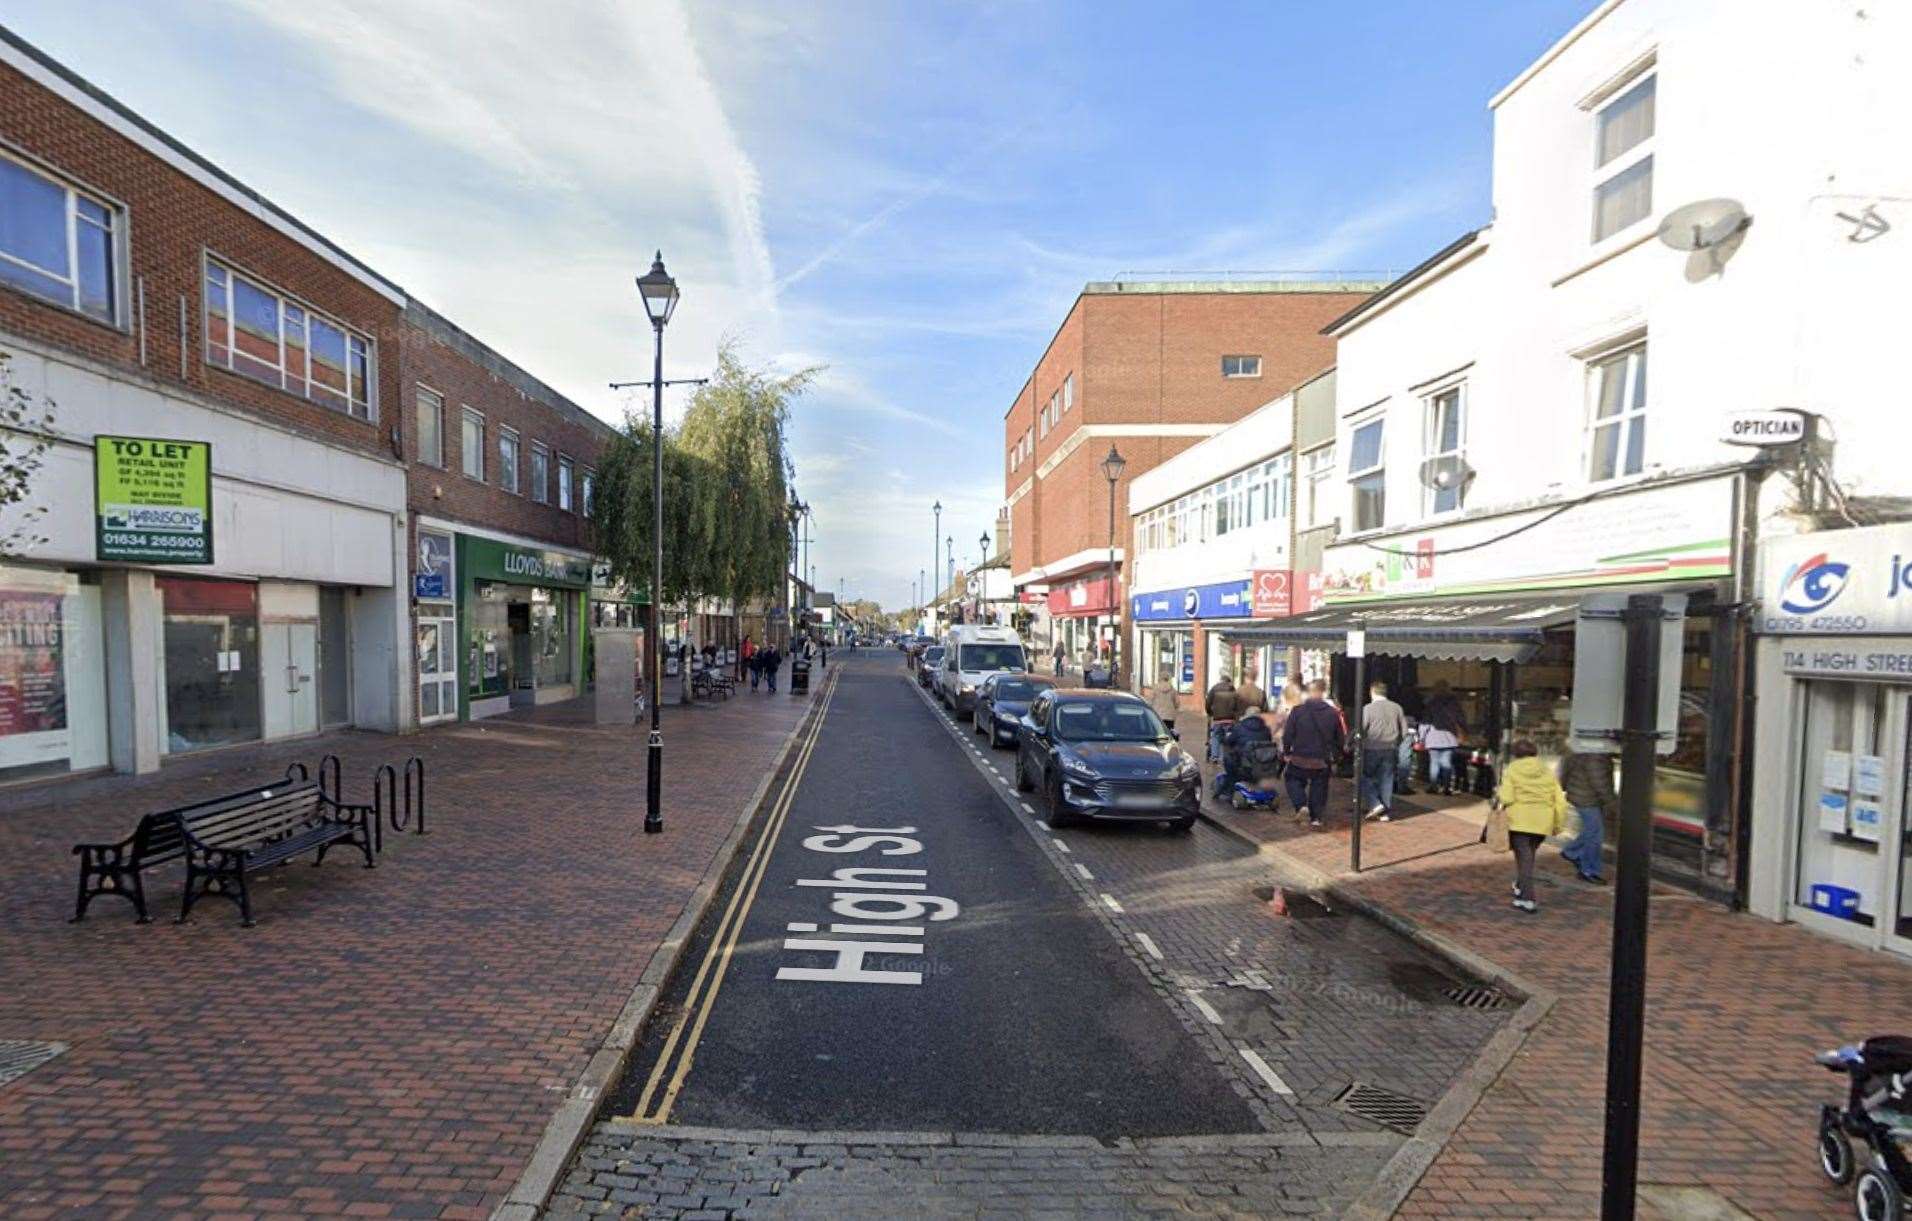 The incident happened in Sittingbourne High Street, near the junction with Station Road. Picture: Google Maps